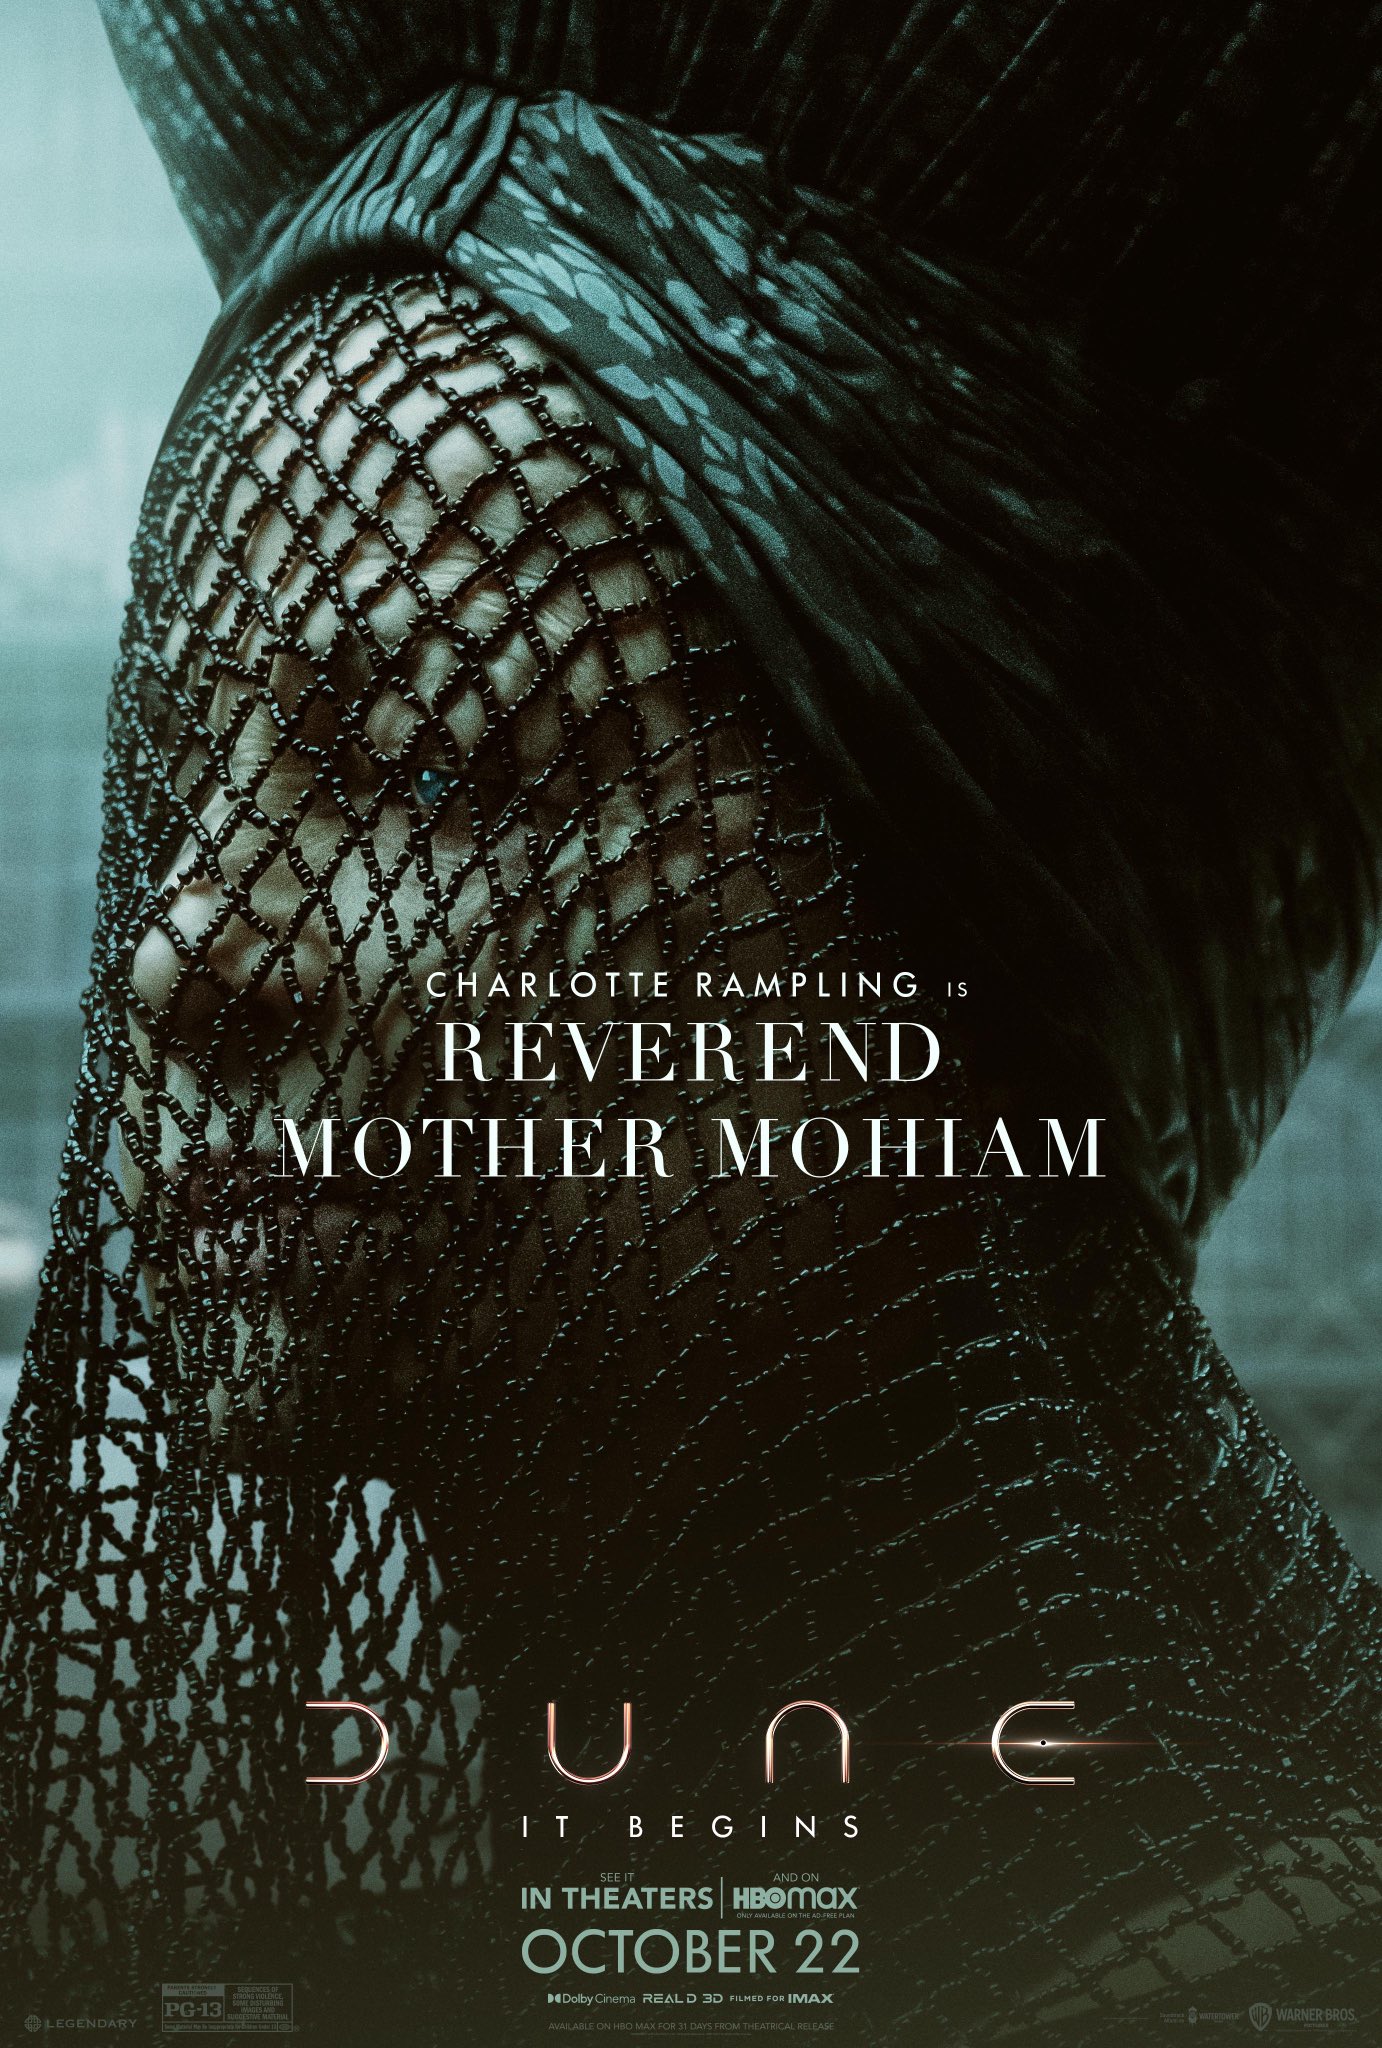 Charlotte Rampling is Reverend Mother Mohiam